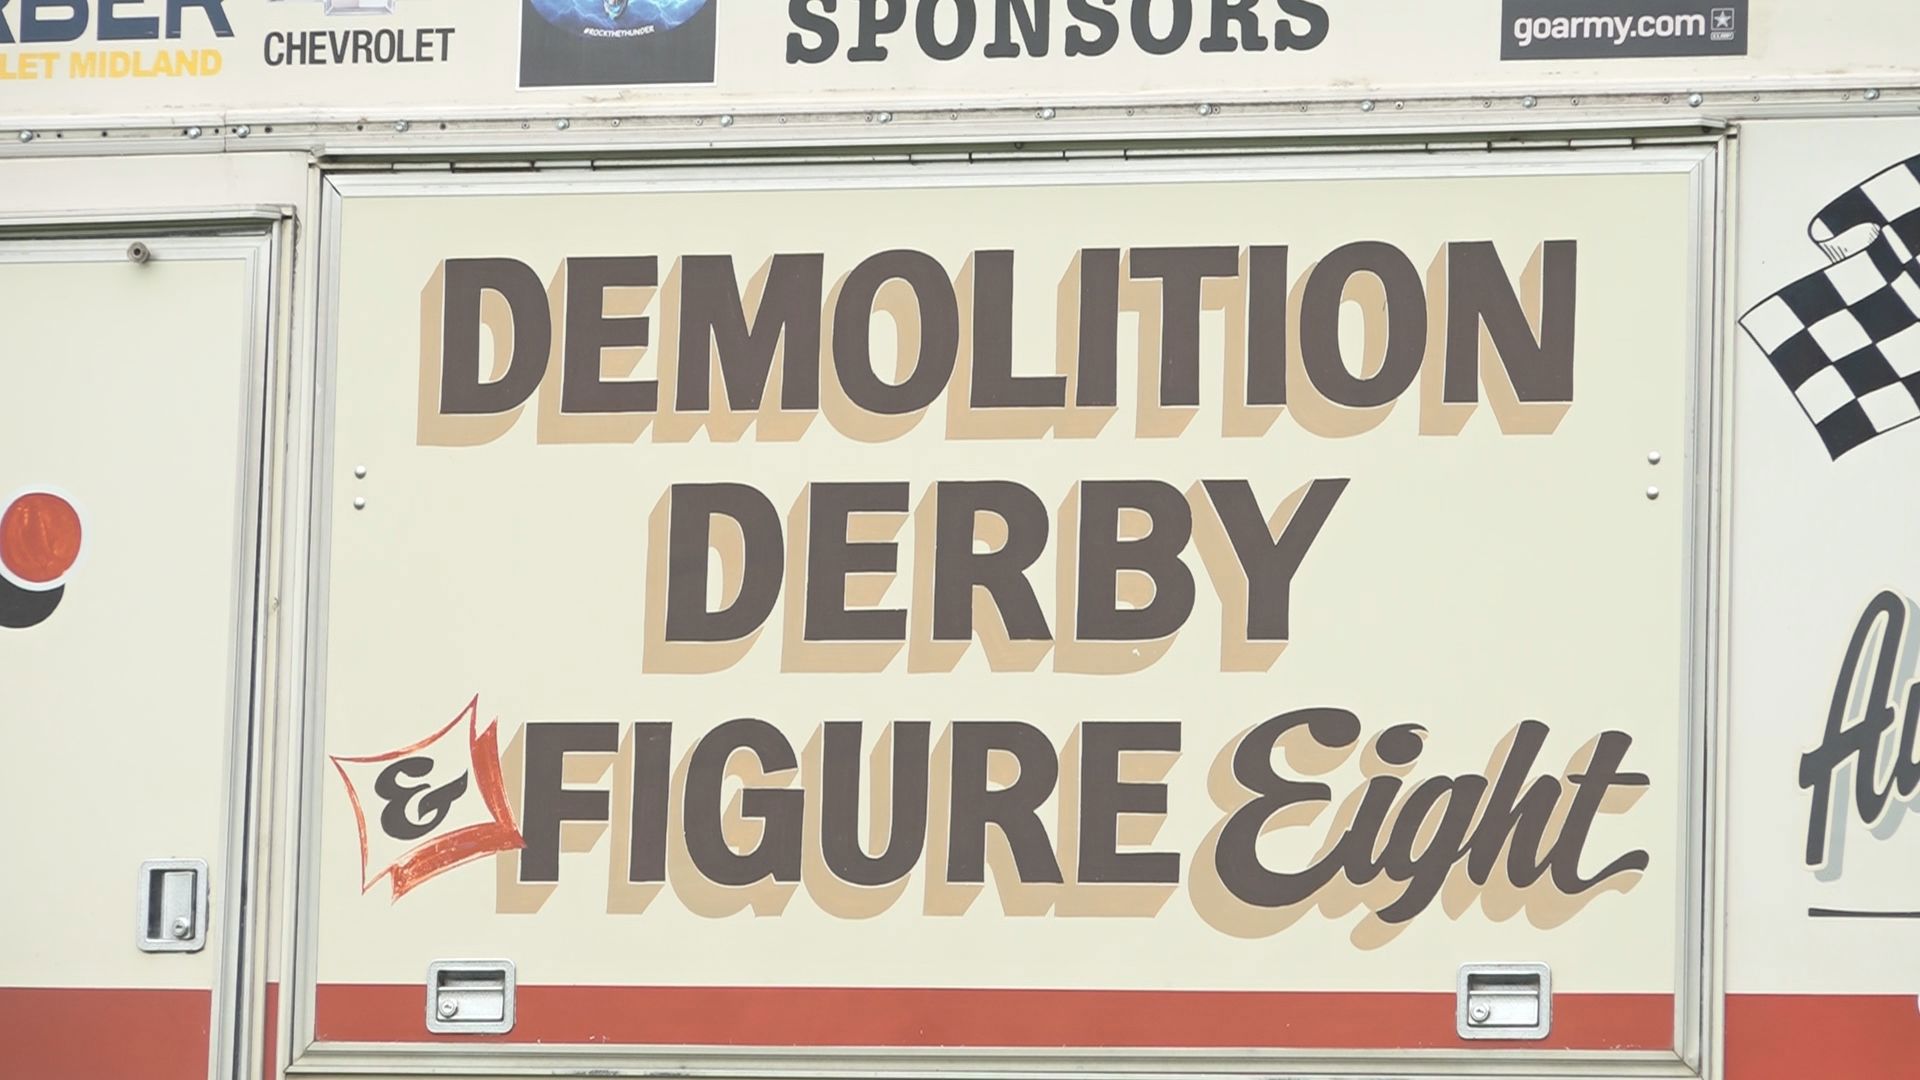 With the festivities starting Wednesday evening with a rodeo, organizers say the main event will be the first-ever motorhome derby.